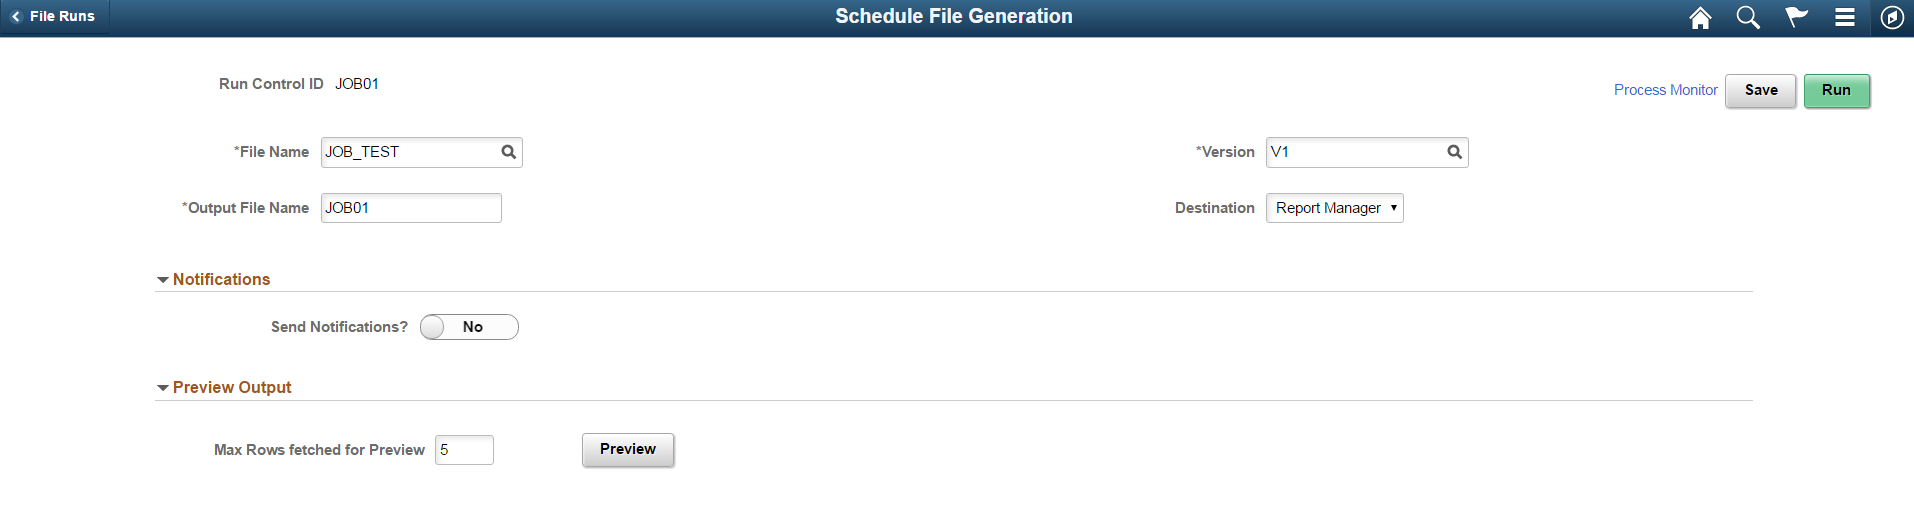 Schedule File Generation page